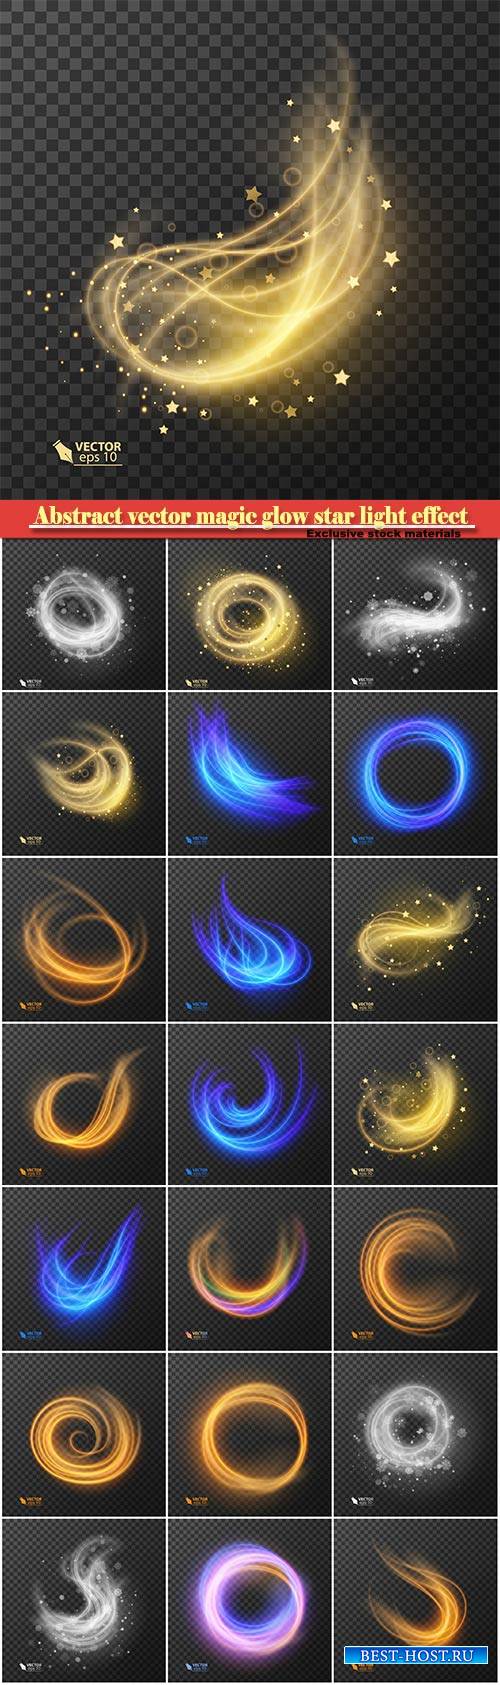 Abstract vector magic glow star light effect with neon curved lines, sparkl ...